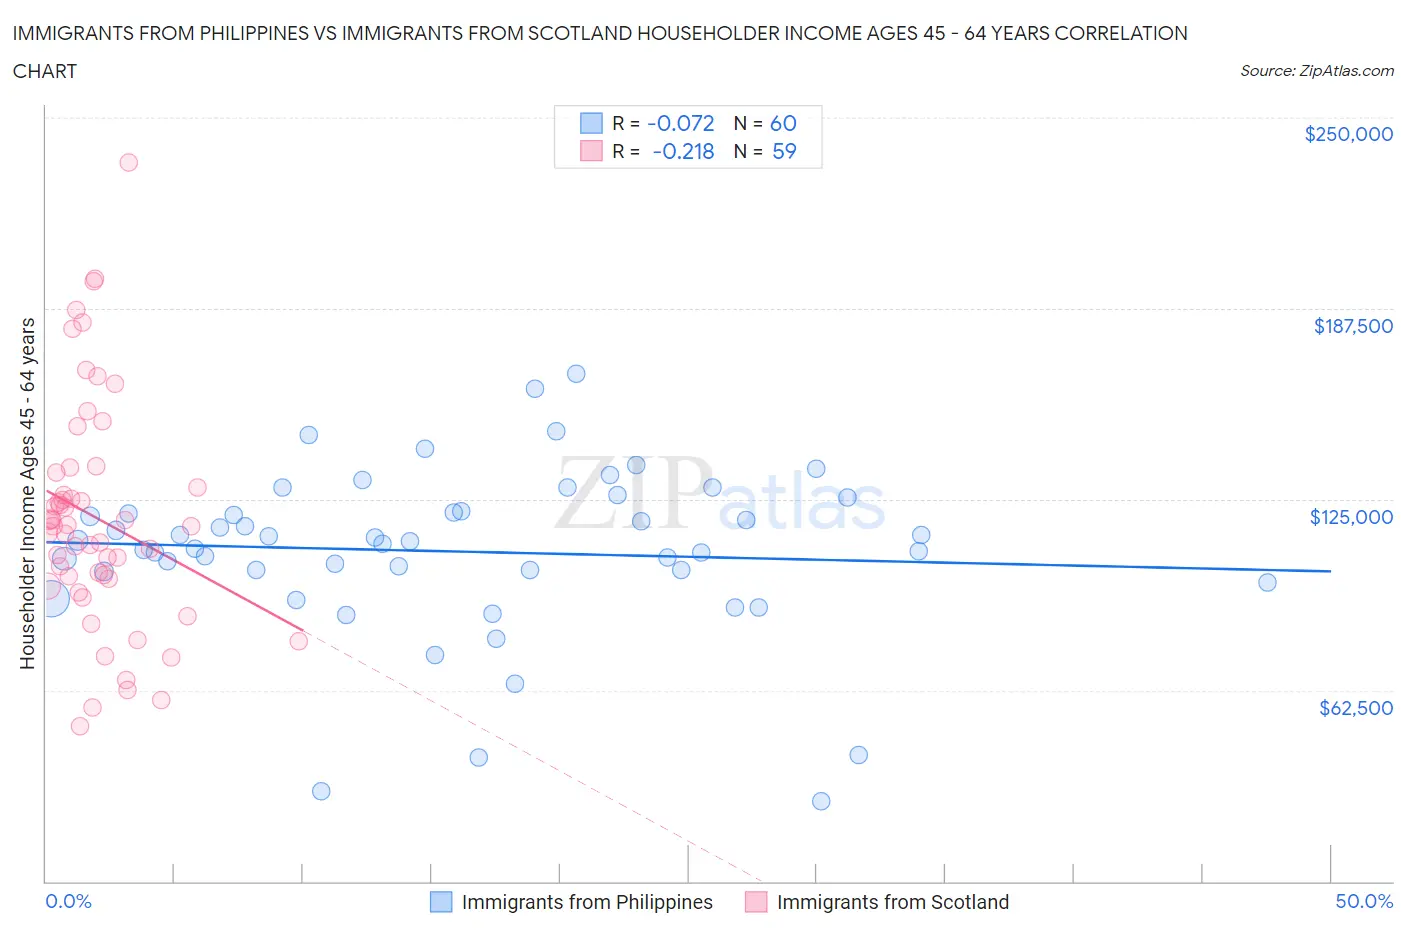 Immigrants from Philippines vs Immigrants from Scotland Householder Income Ages 45 - 64 years